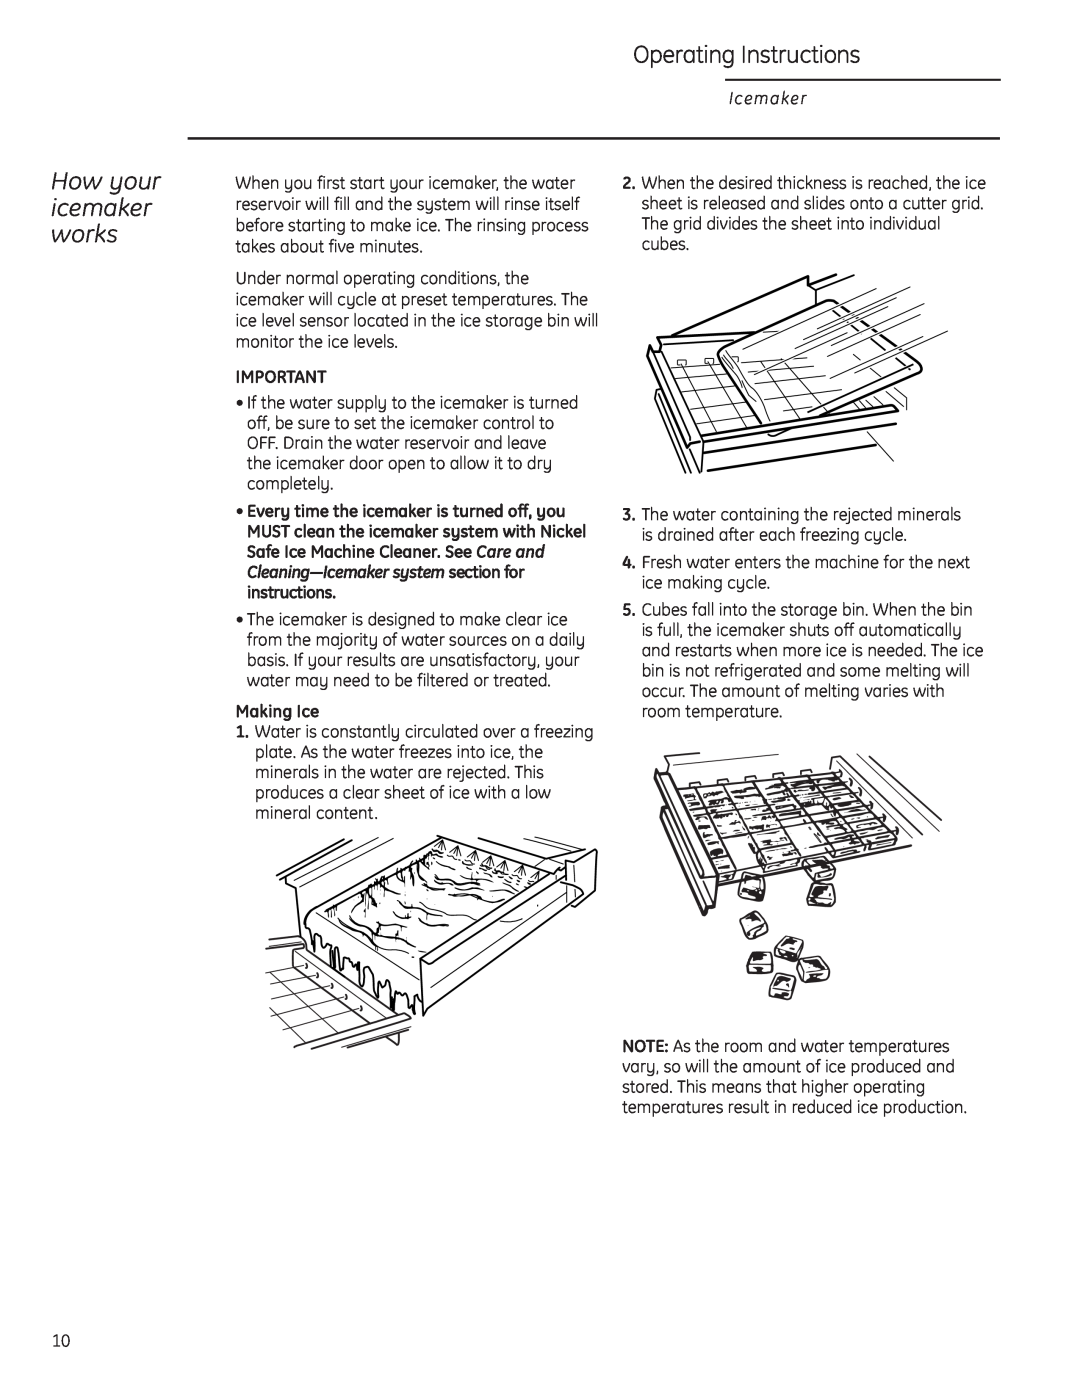 GE ZDIS150, ZDIC150 owner manual Operating Instructions, How your icemaker works, Making Ice 